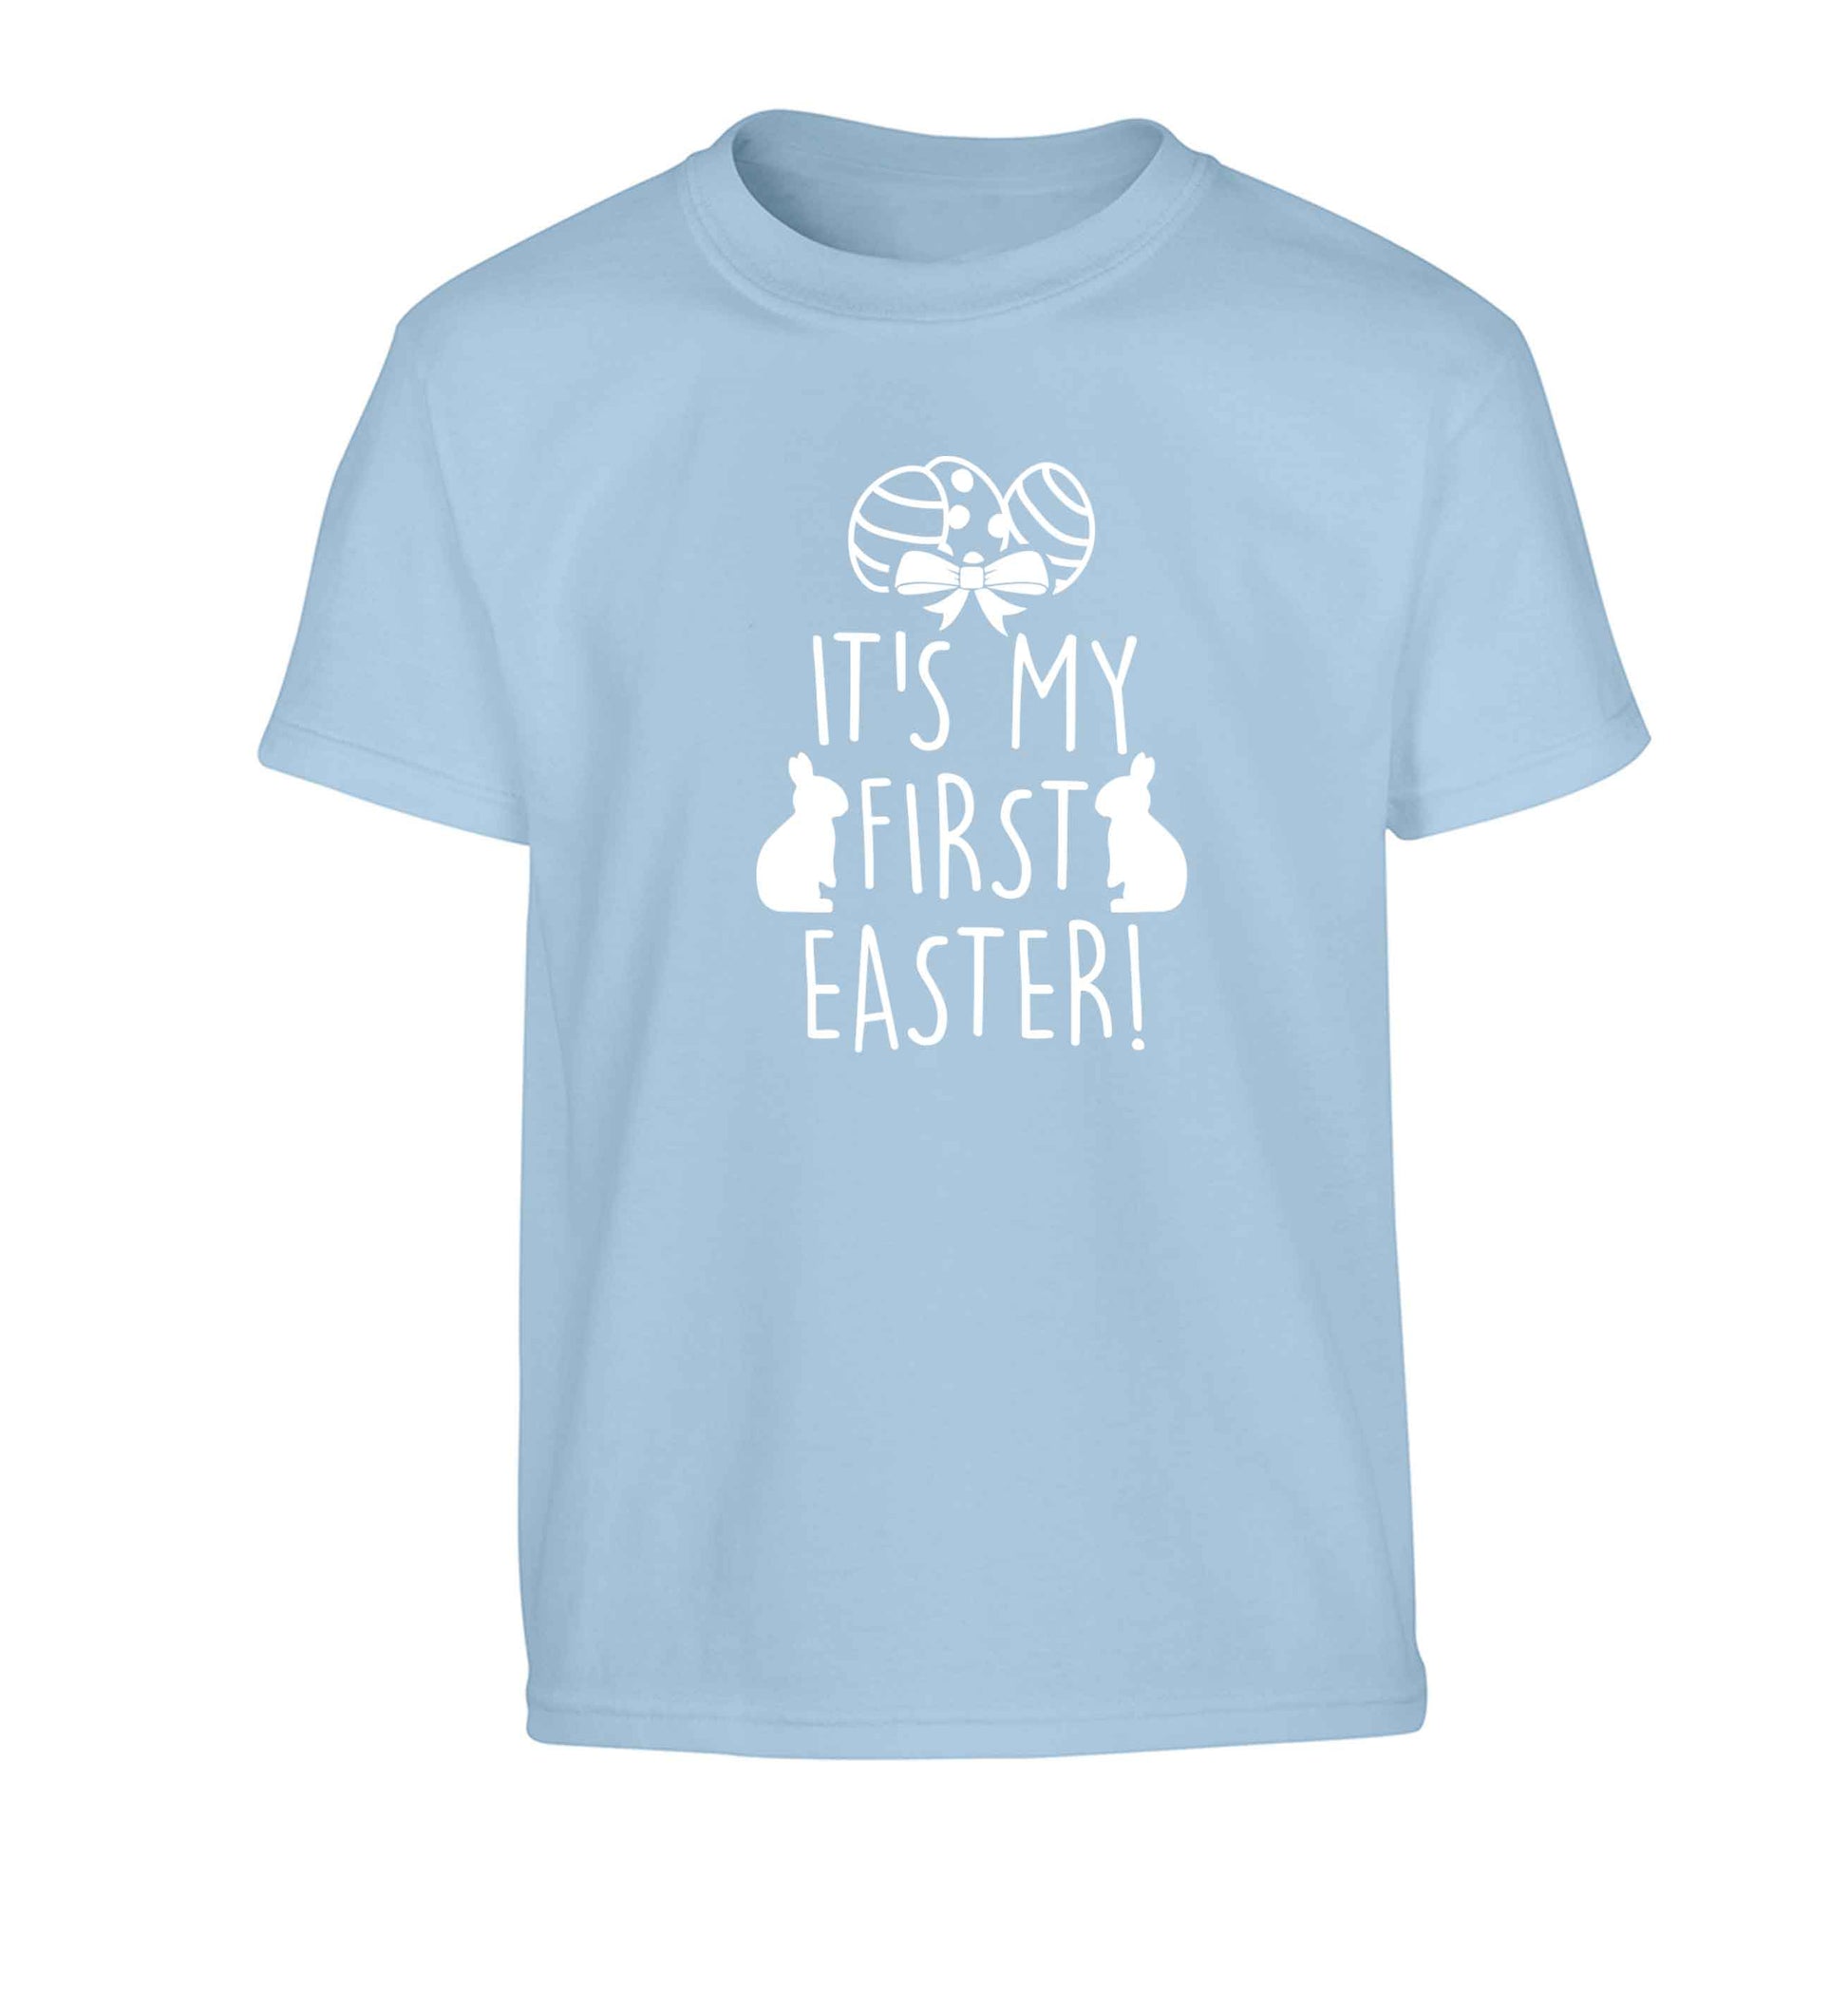 It's my first Easter Children's light blue Tshirt 12-13 Years